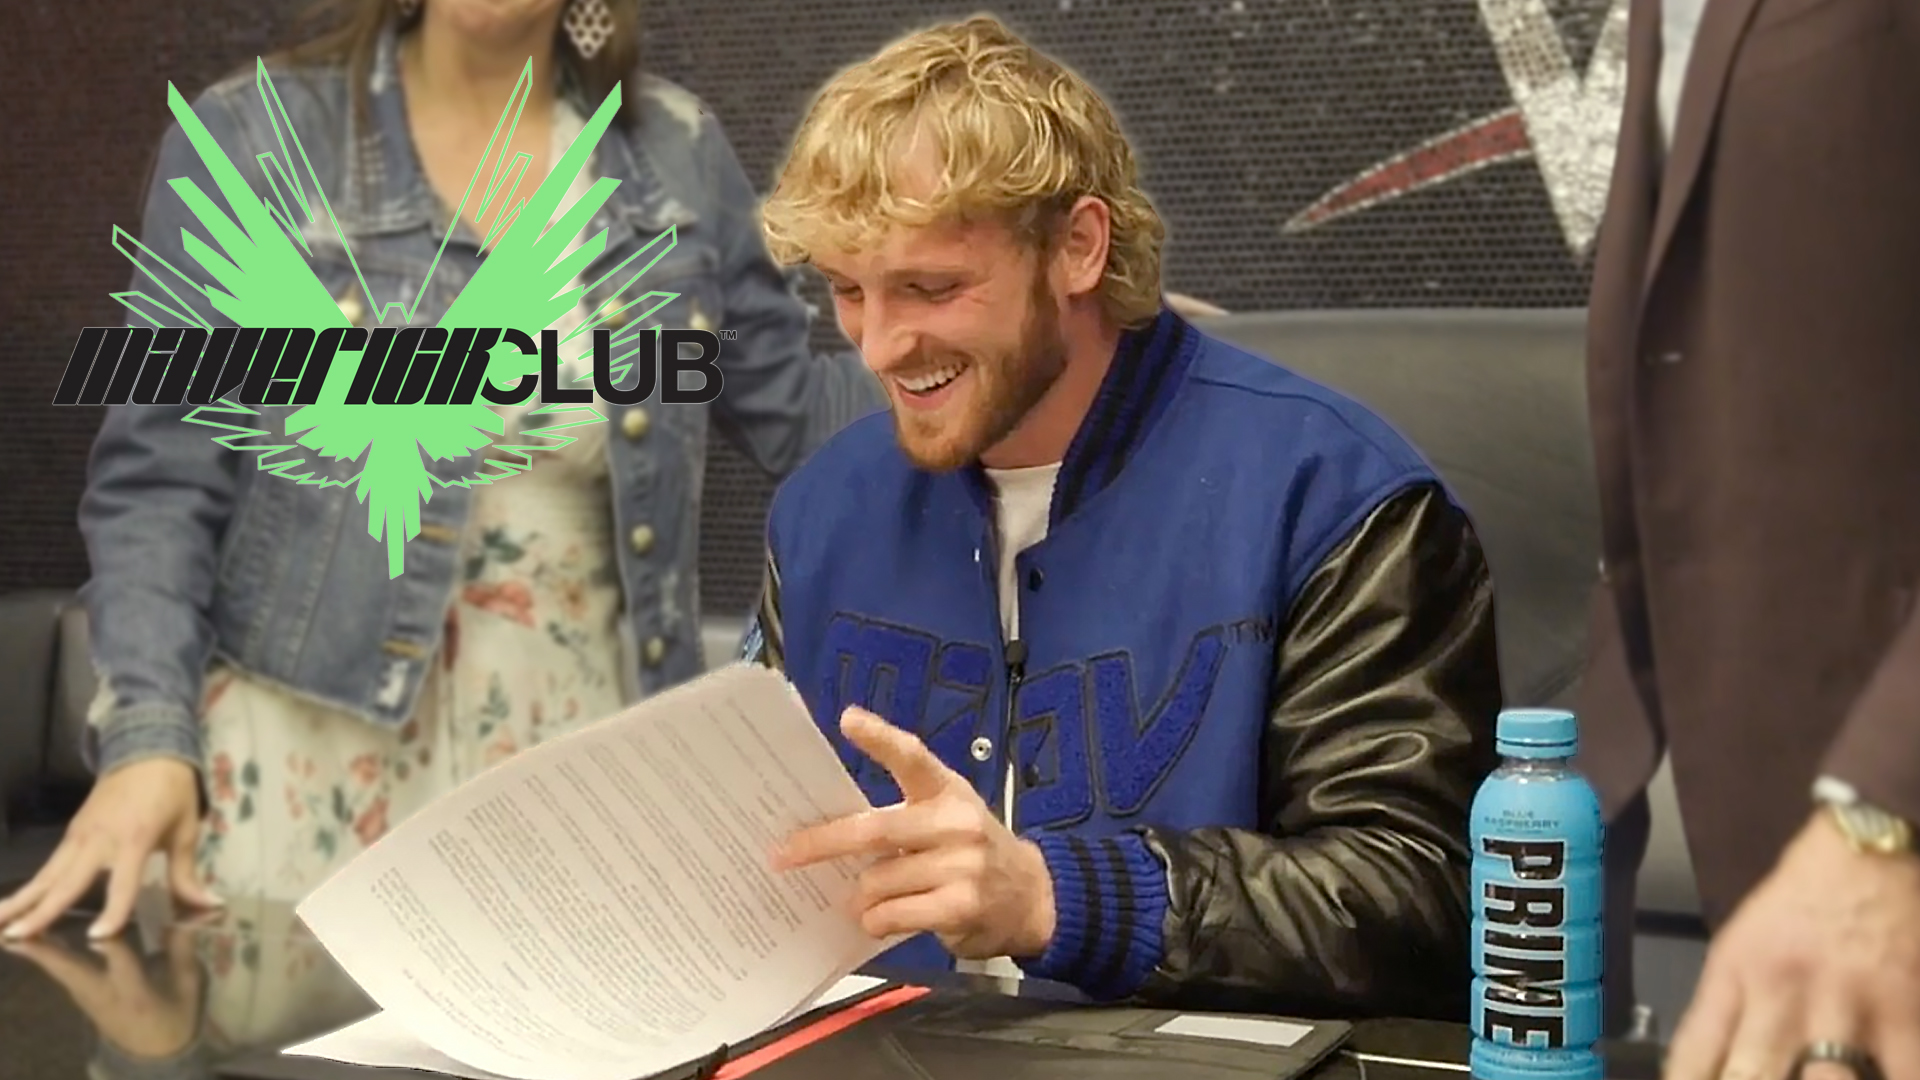 I Signed With The WWE! (Behind The Scenes)